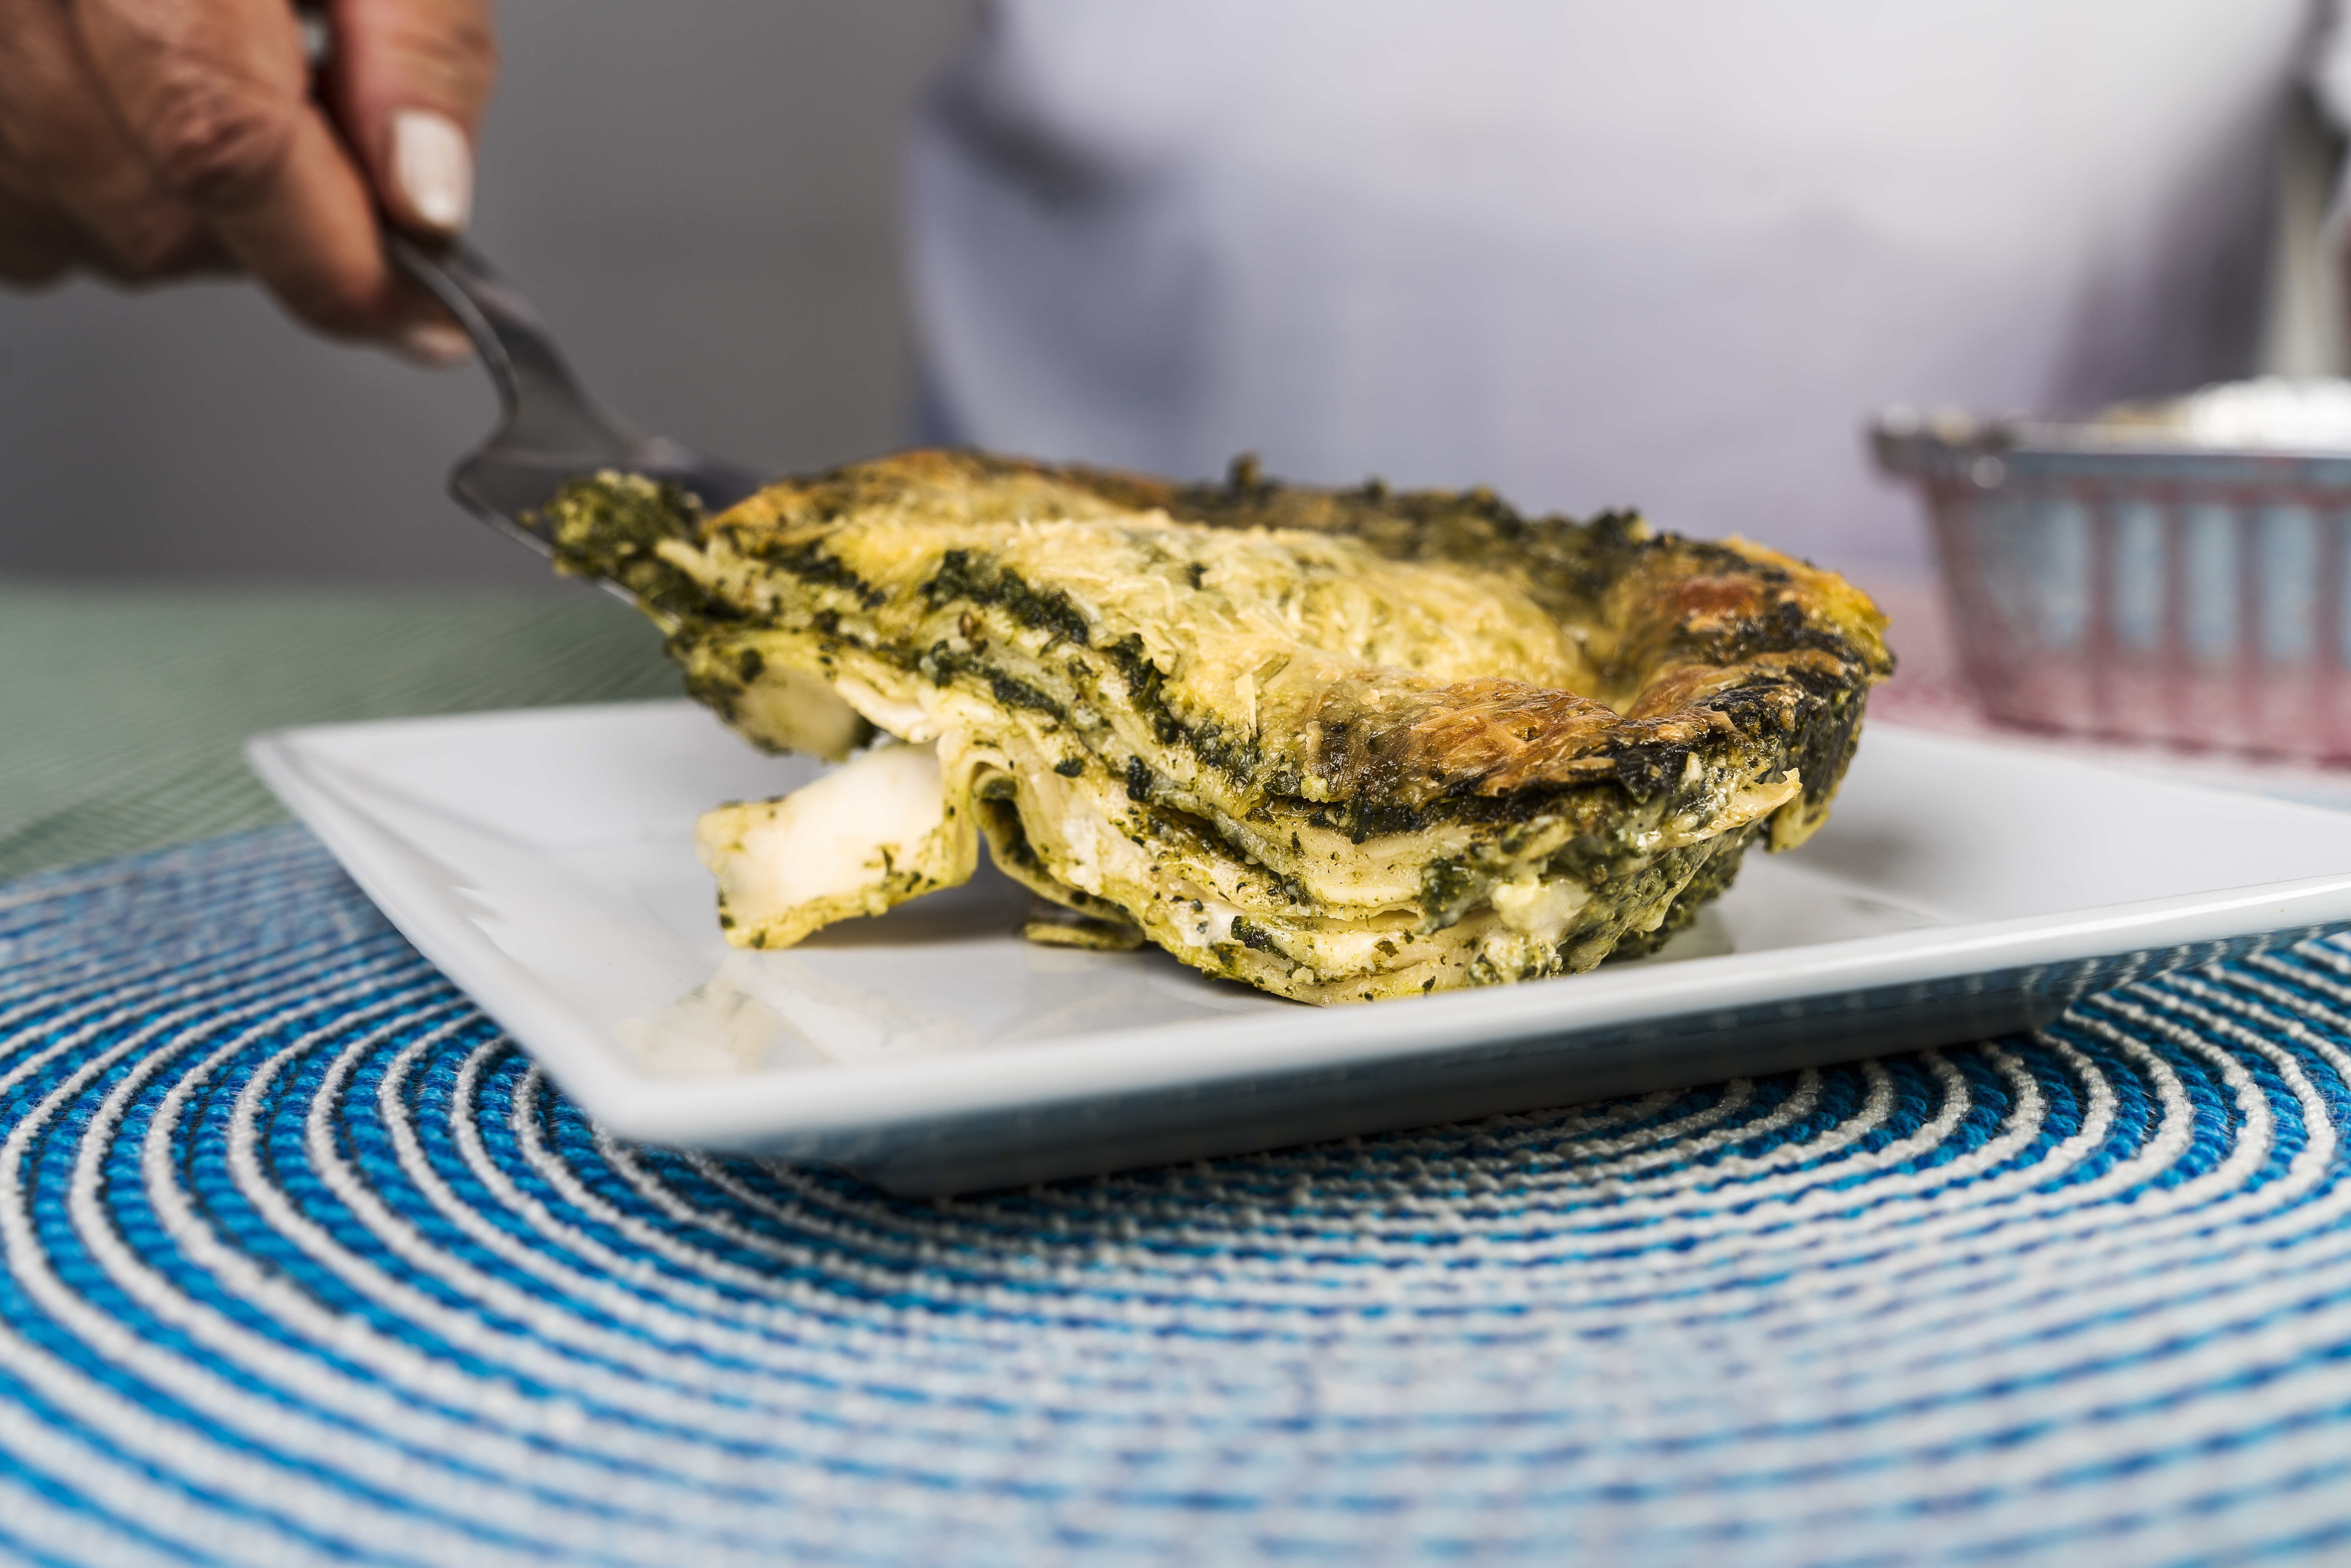 Close up view of a hand of an adult woman serving a portion of freshly made pesto lasagna on a plate.